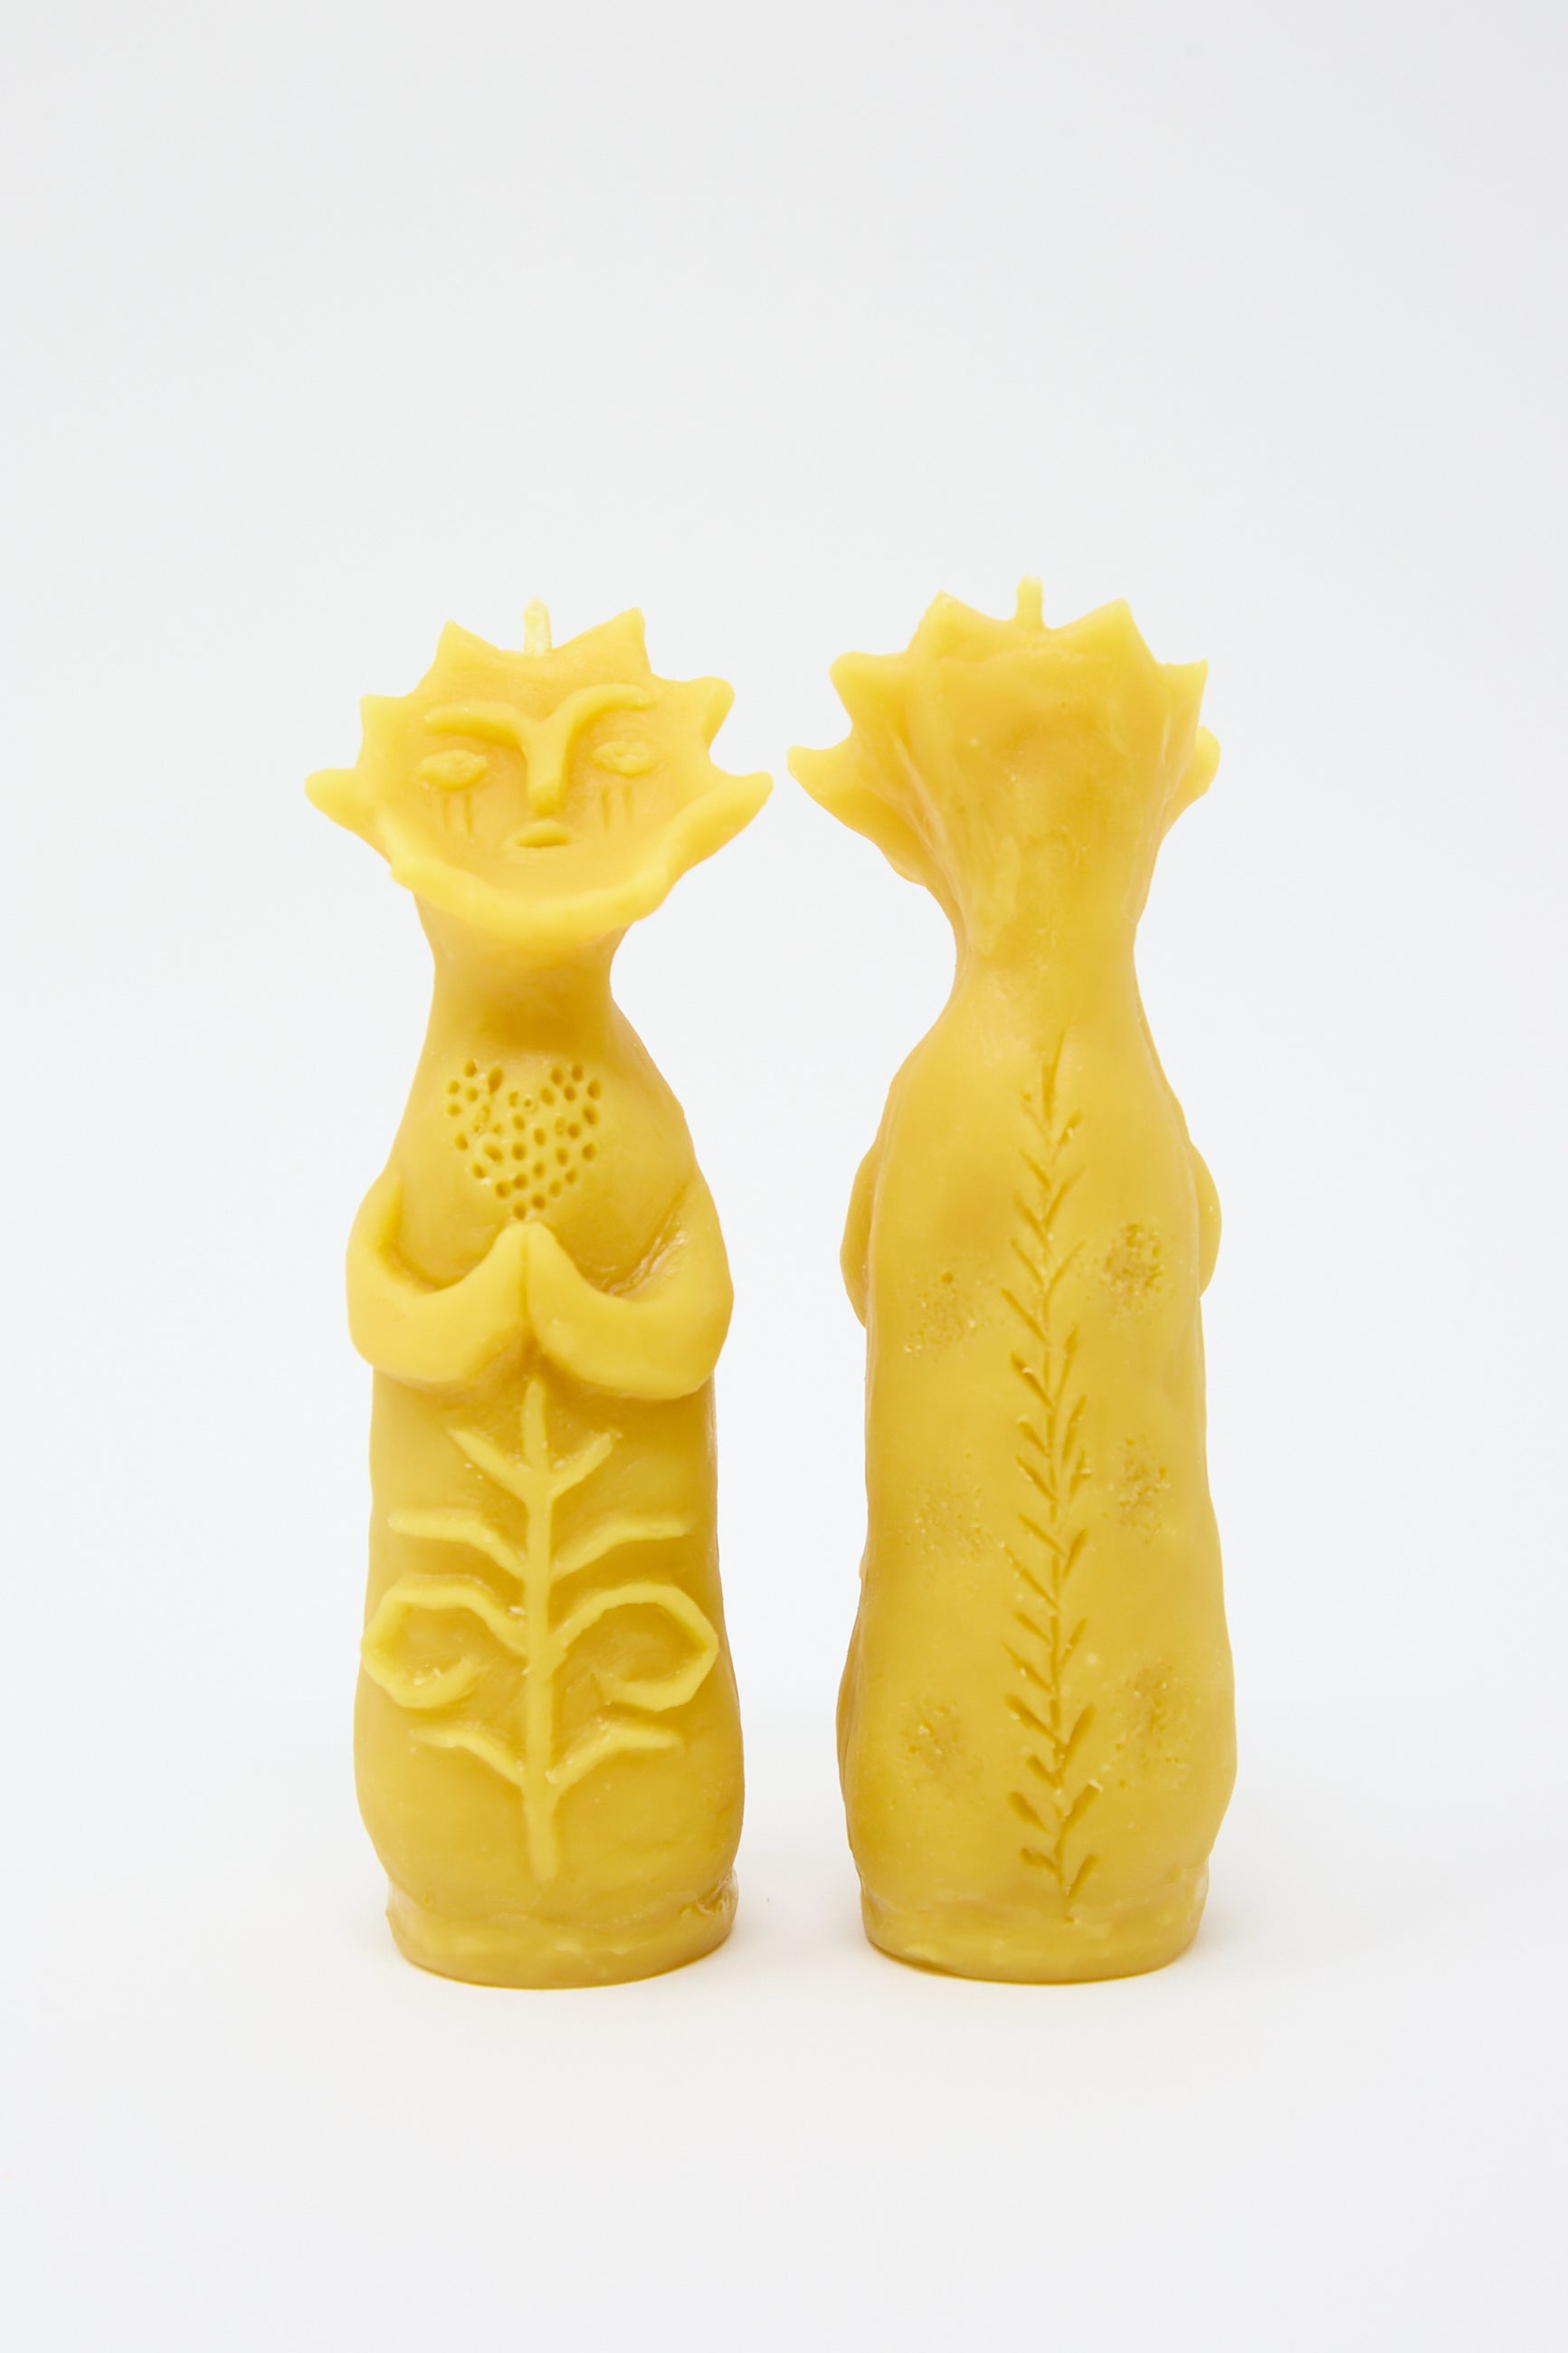 Two Rinn to Hitsuji Sun Goddess Candles shaped like anthropomorphic plants, with one resembling a sunflower and the other a stalk of wheat, against a white background.